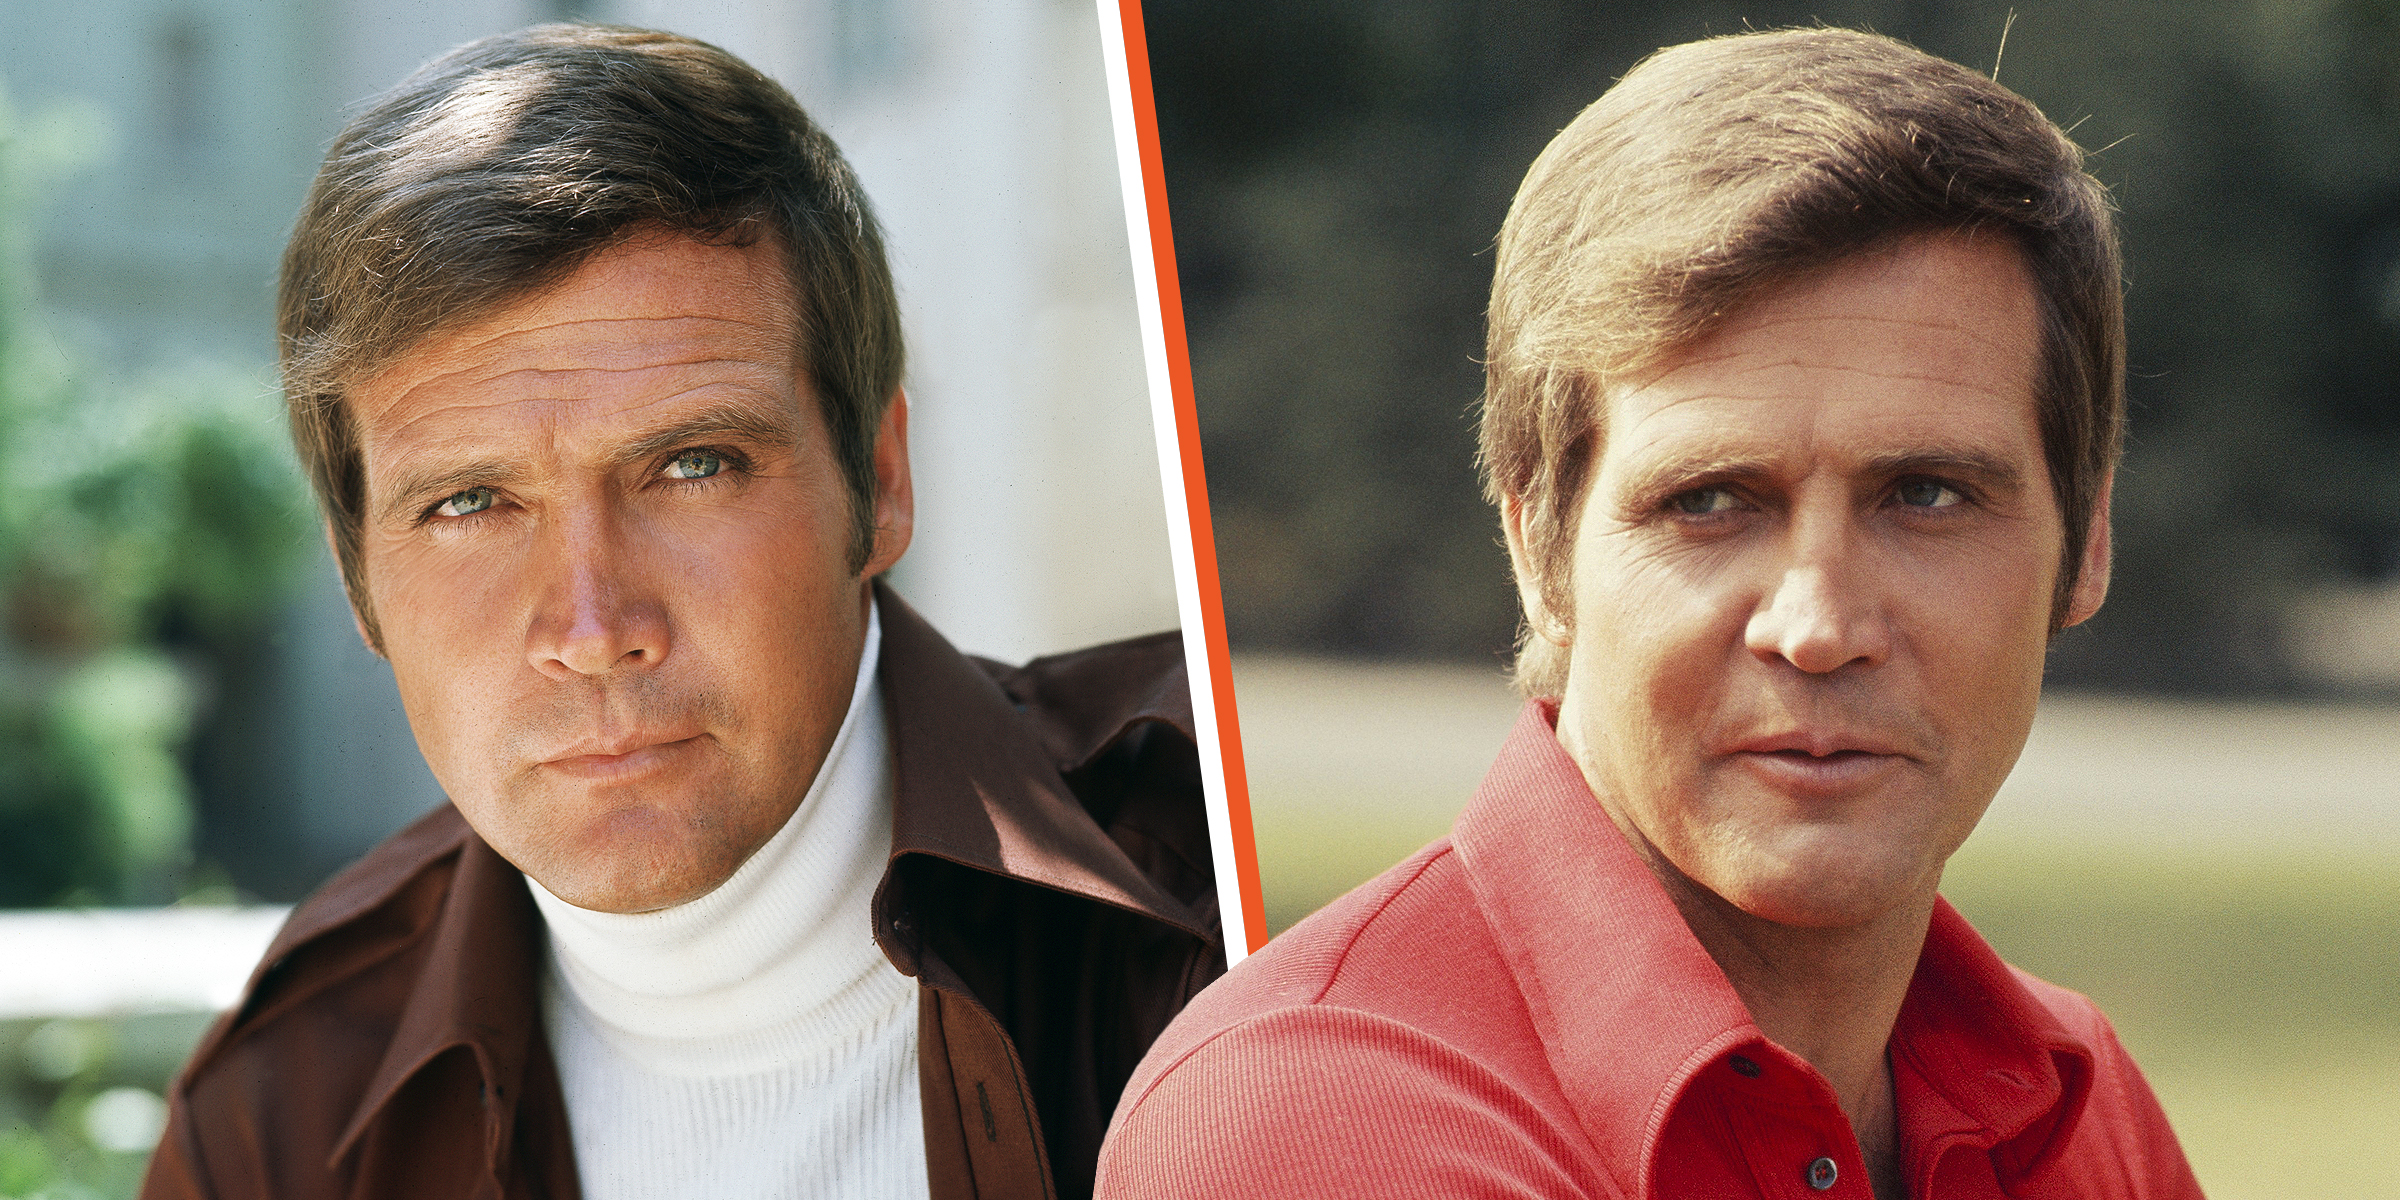 Lee Majors | Source: Getty Images